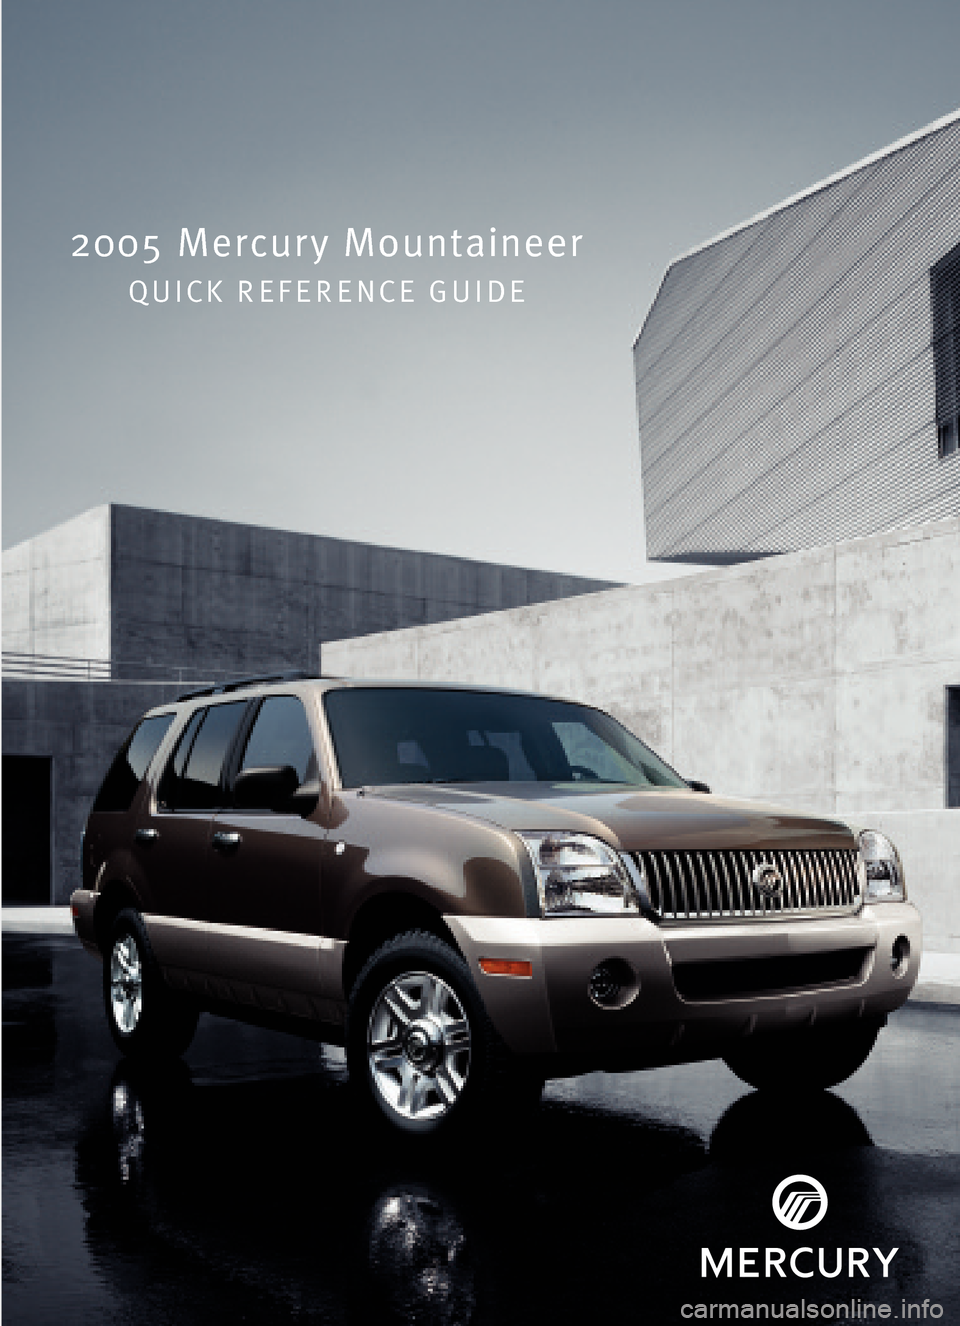 Mercury Mountaineer 2005  Quick Reference Guide 2005 Mercury Mountaineer
QUICK REFERENCE GUIDE 